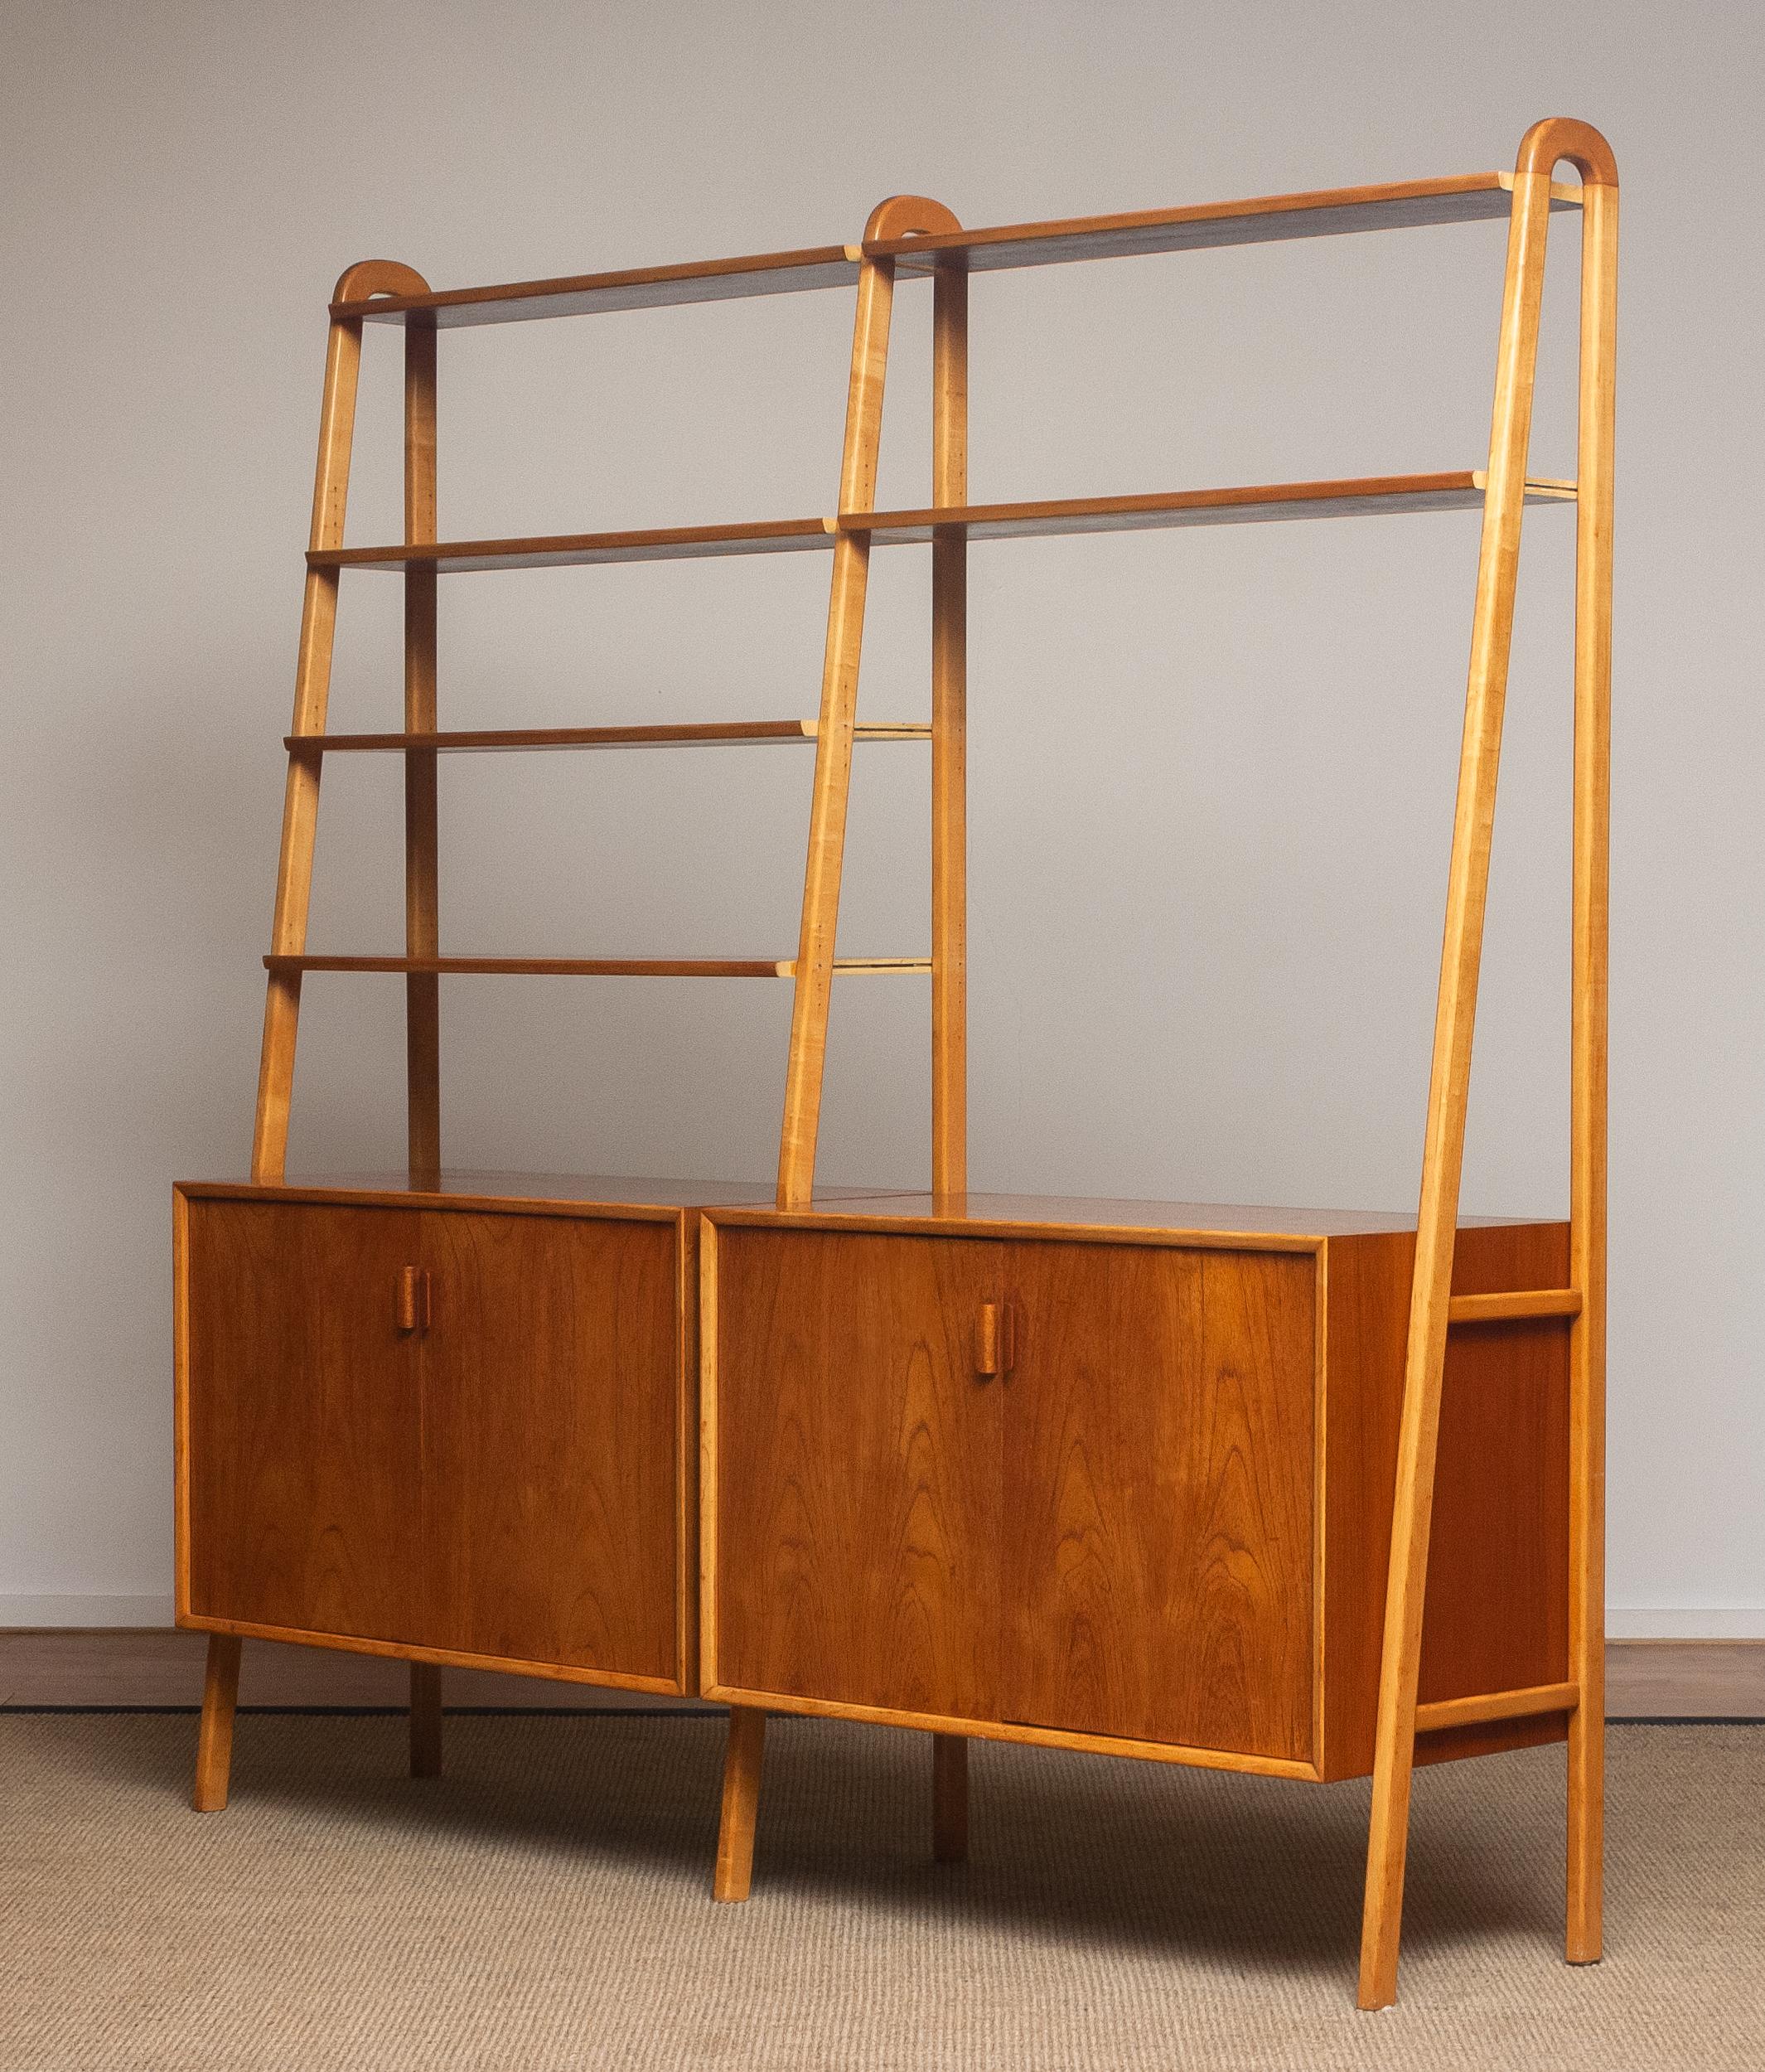 Mid-20th Century 1950s Shelfs / Bookcase / Sideboard in Teak and Beech by Brantorps, Sweden